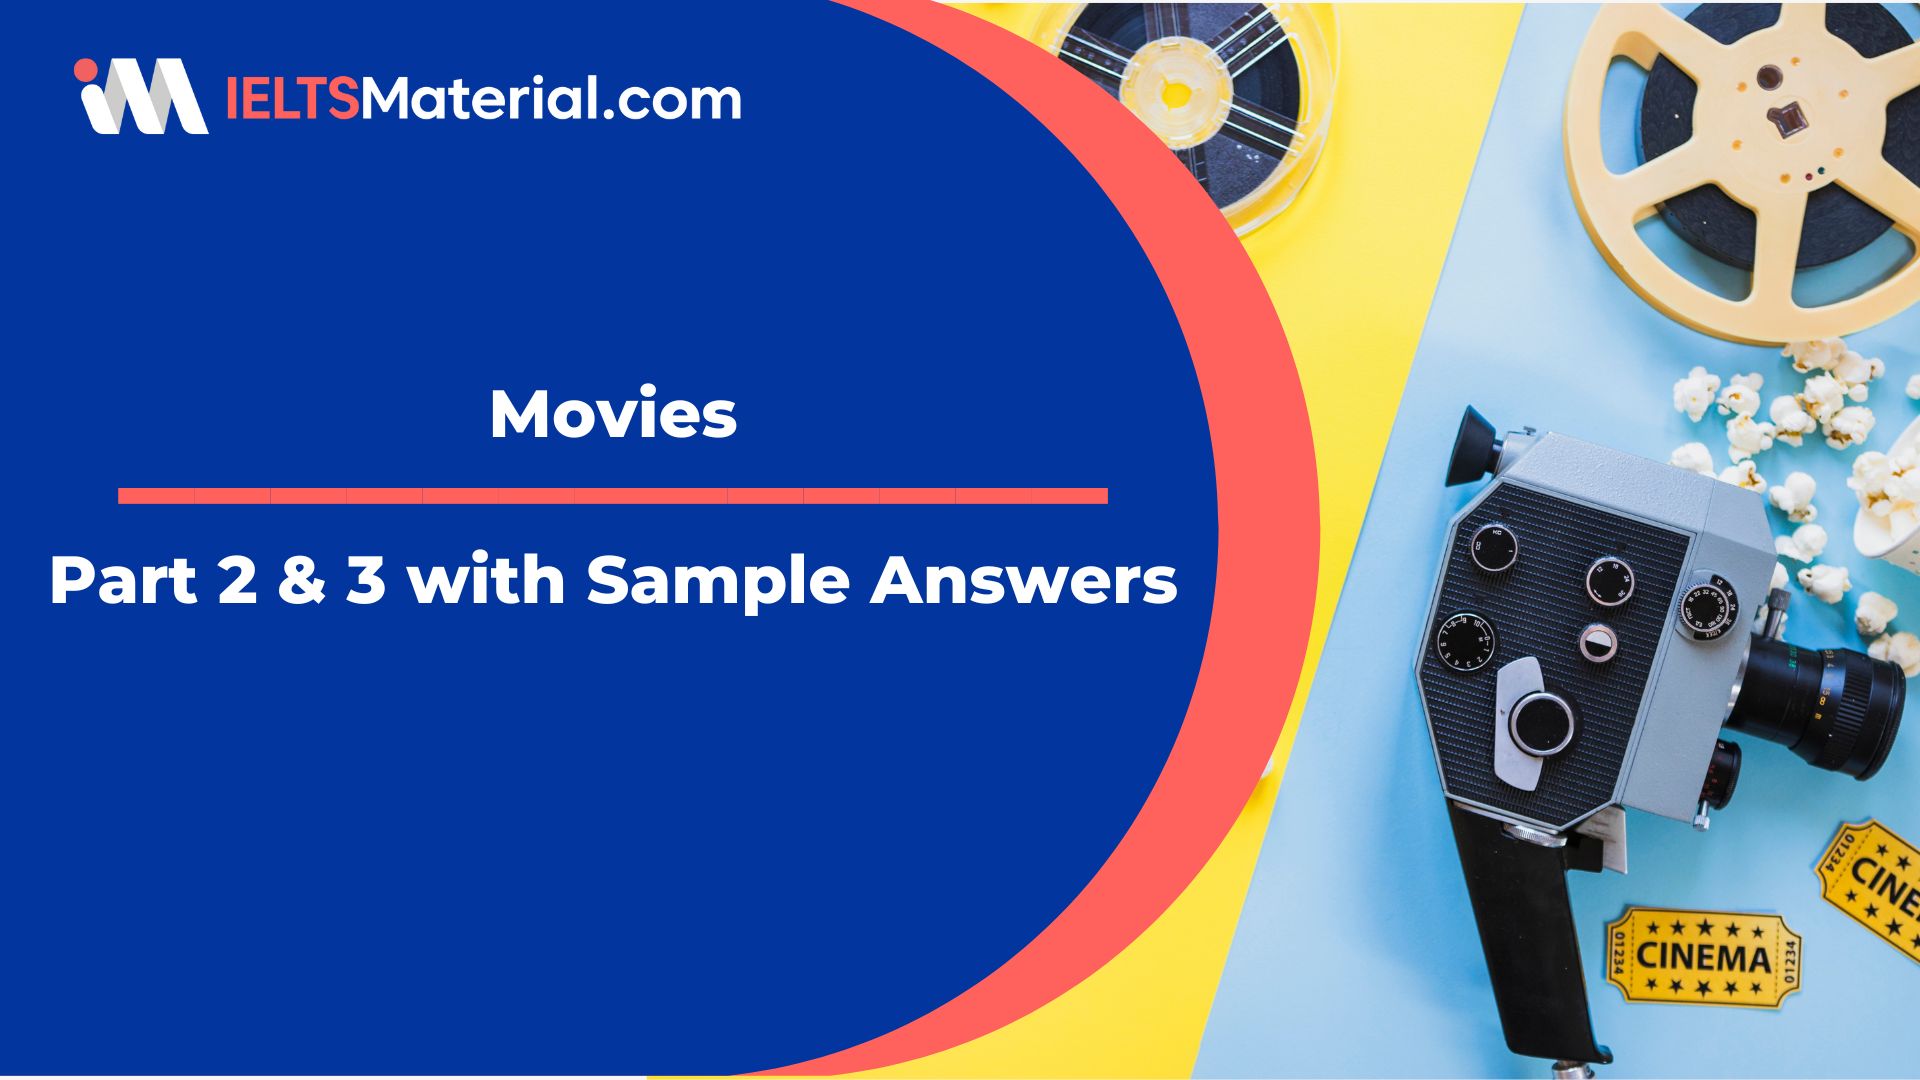 Movies: IELTS Speaking Part 2 & 3 Sample Answers